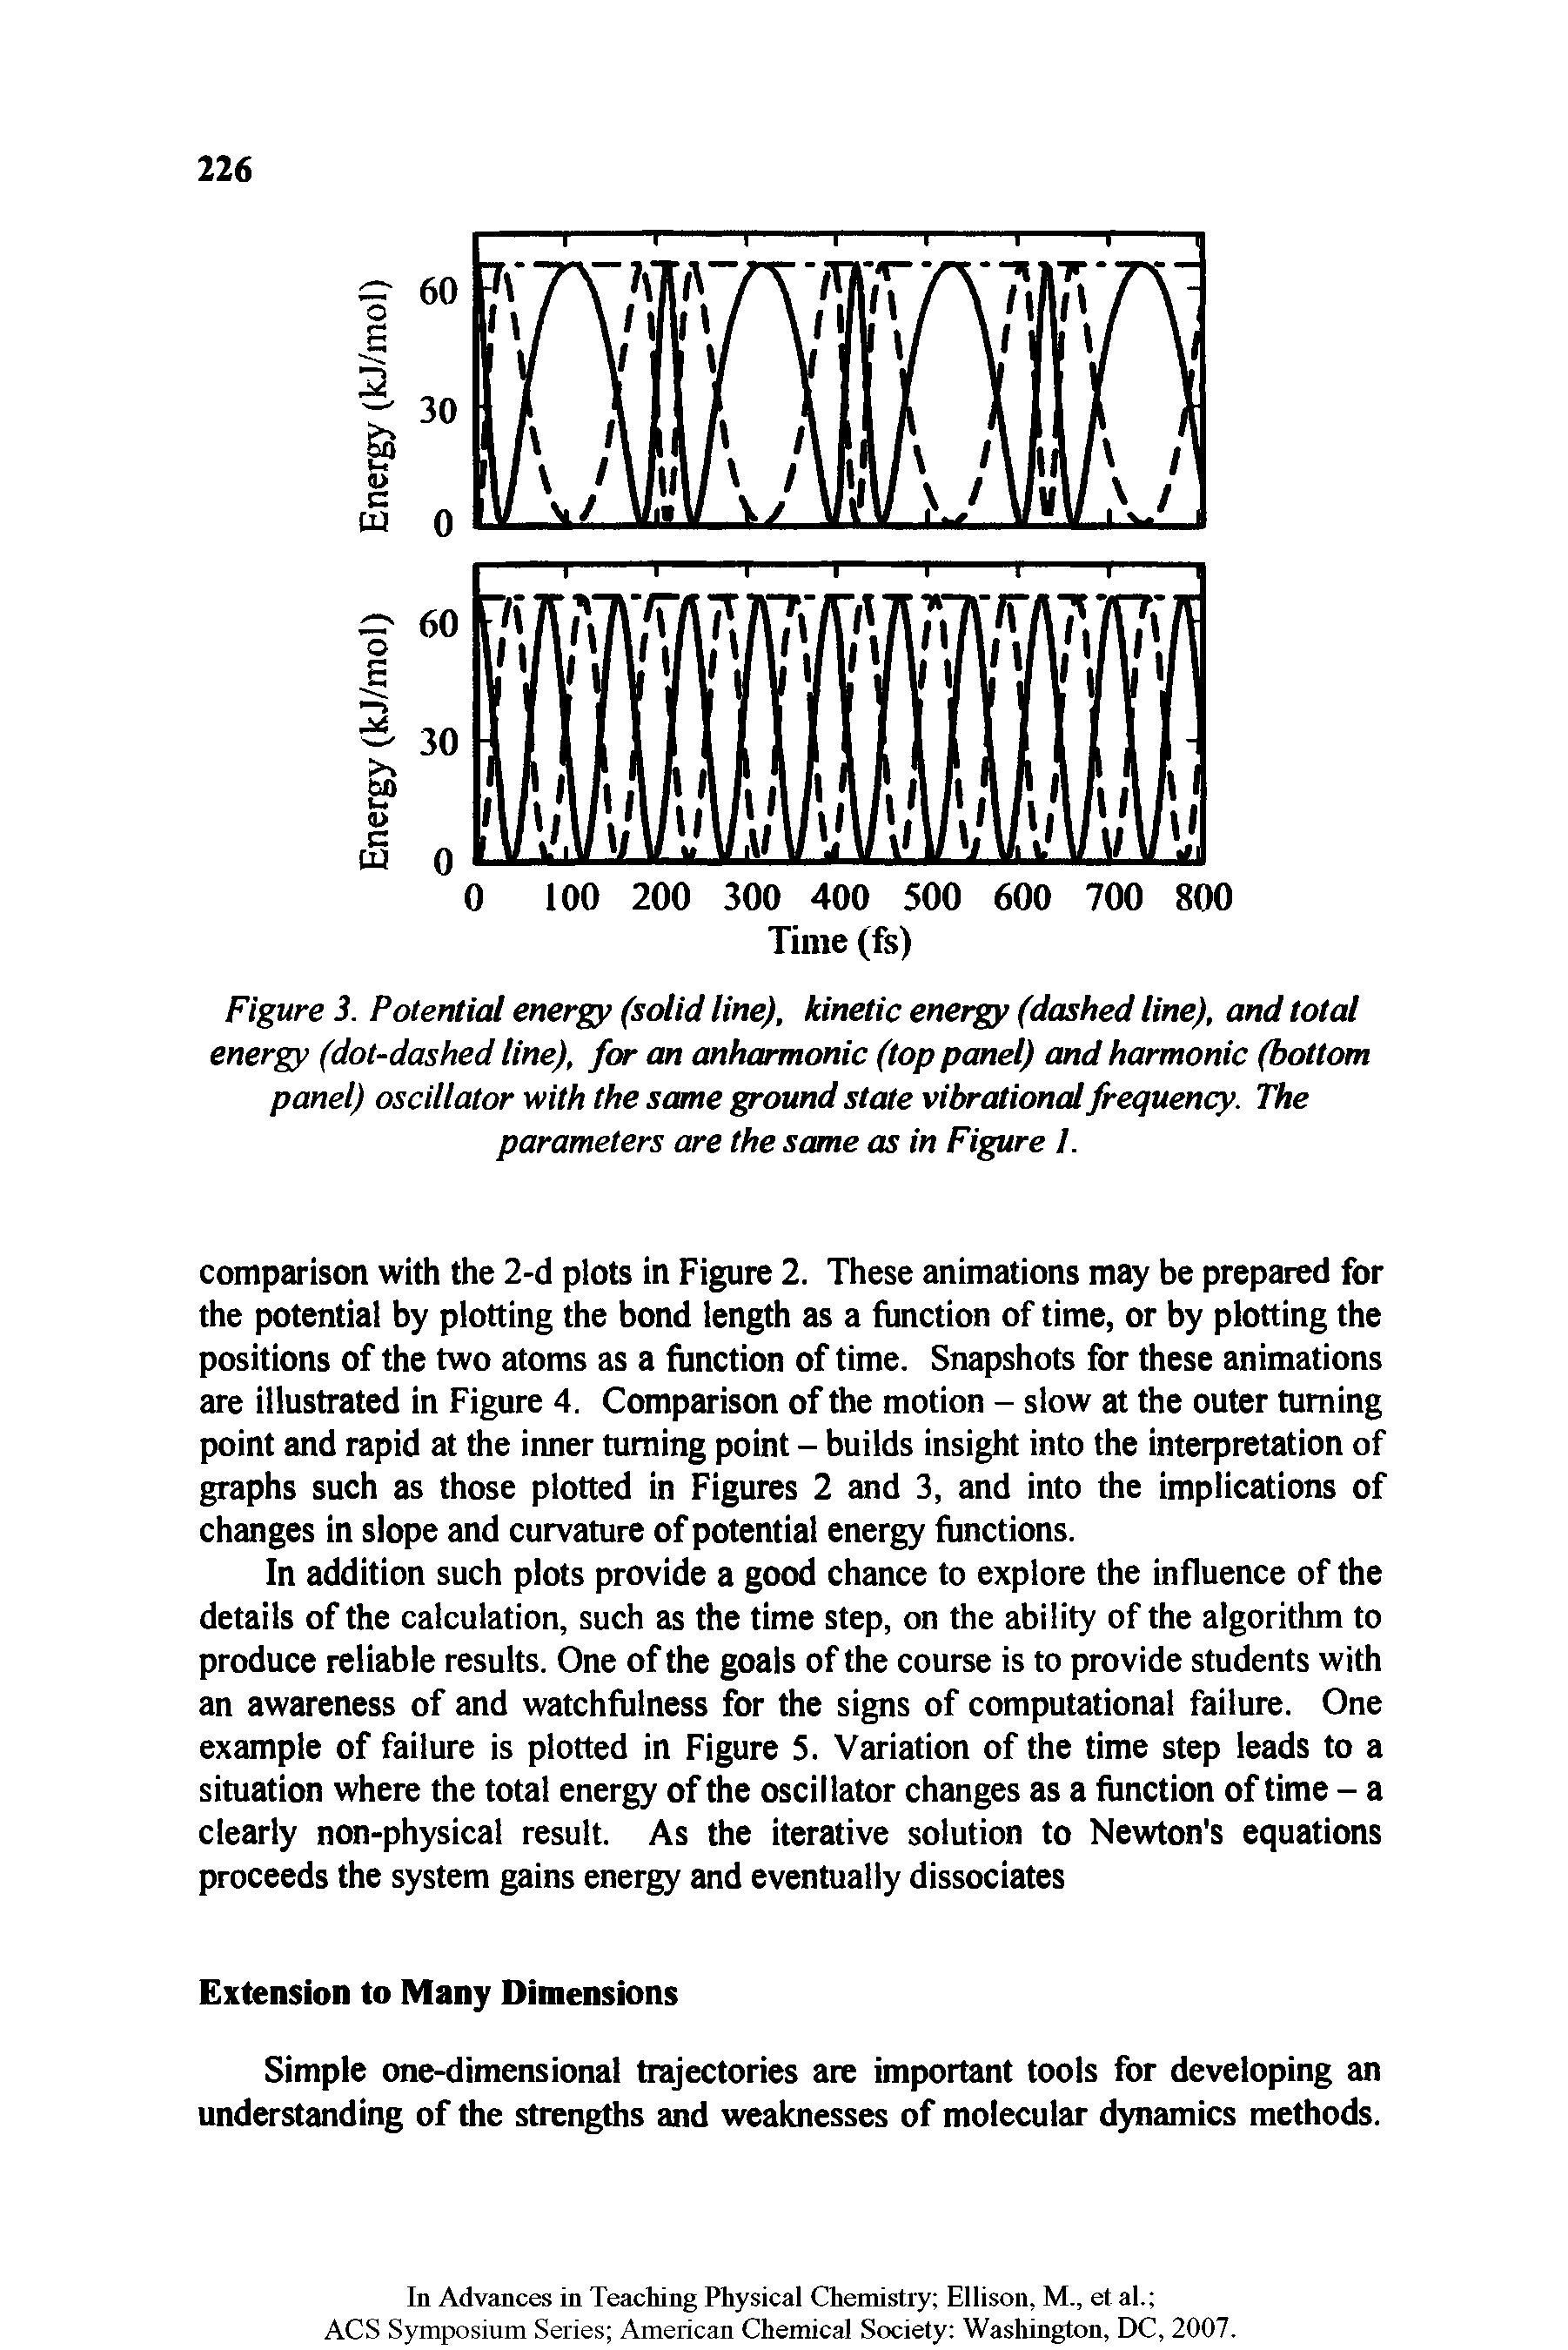 Figure 3. Potential energy (solid line), kinetic energy (dashed line), and total energy (dot-dashed line), for an anharmonic (top panel) and harmonic (bottom panel) oscillator with the same ground state vibrational frequency. The parameters are the same as in Figure I.